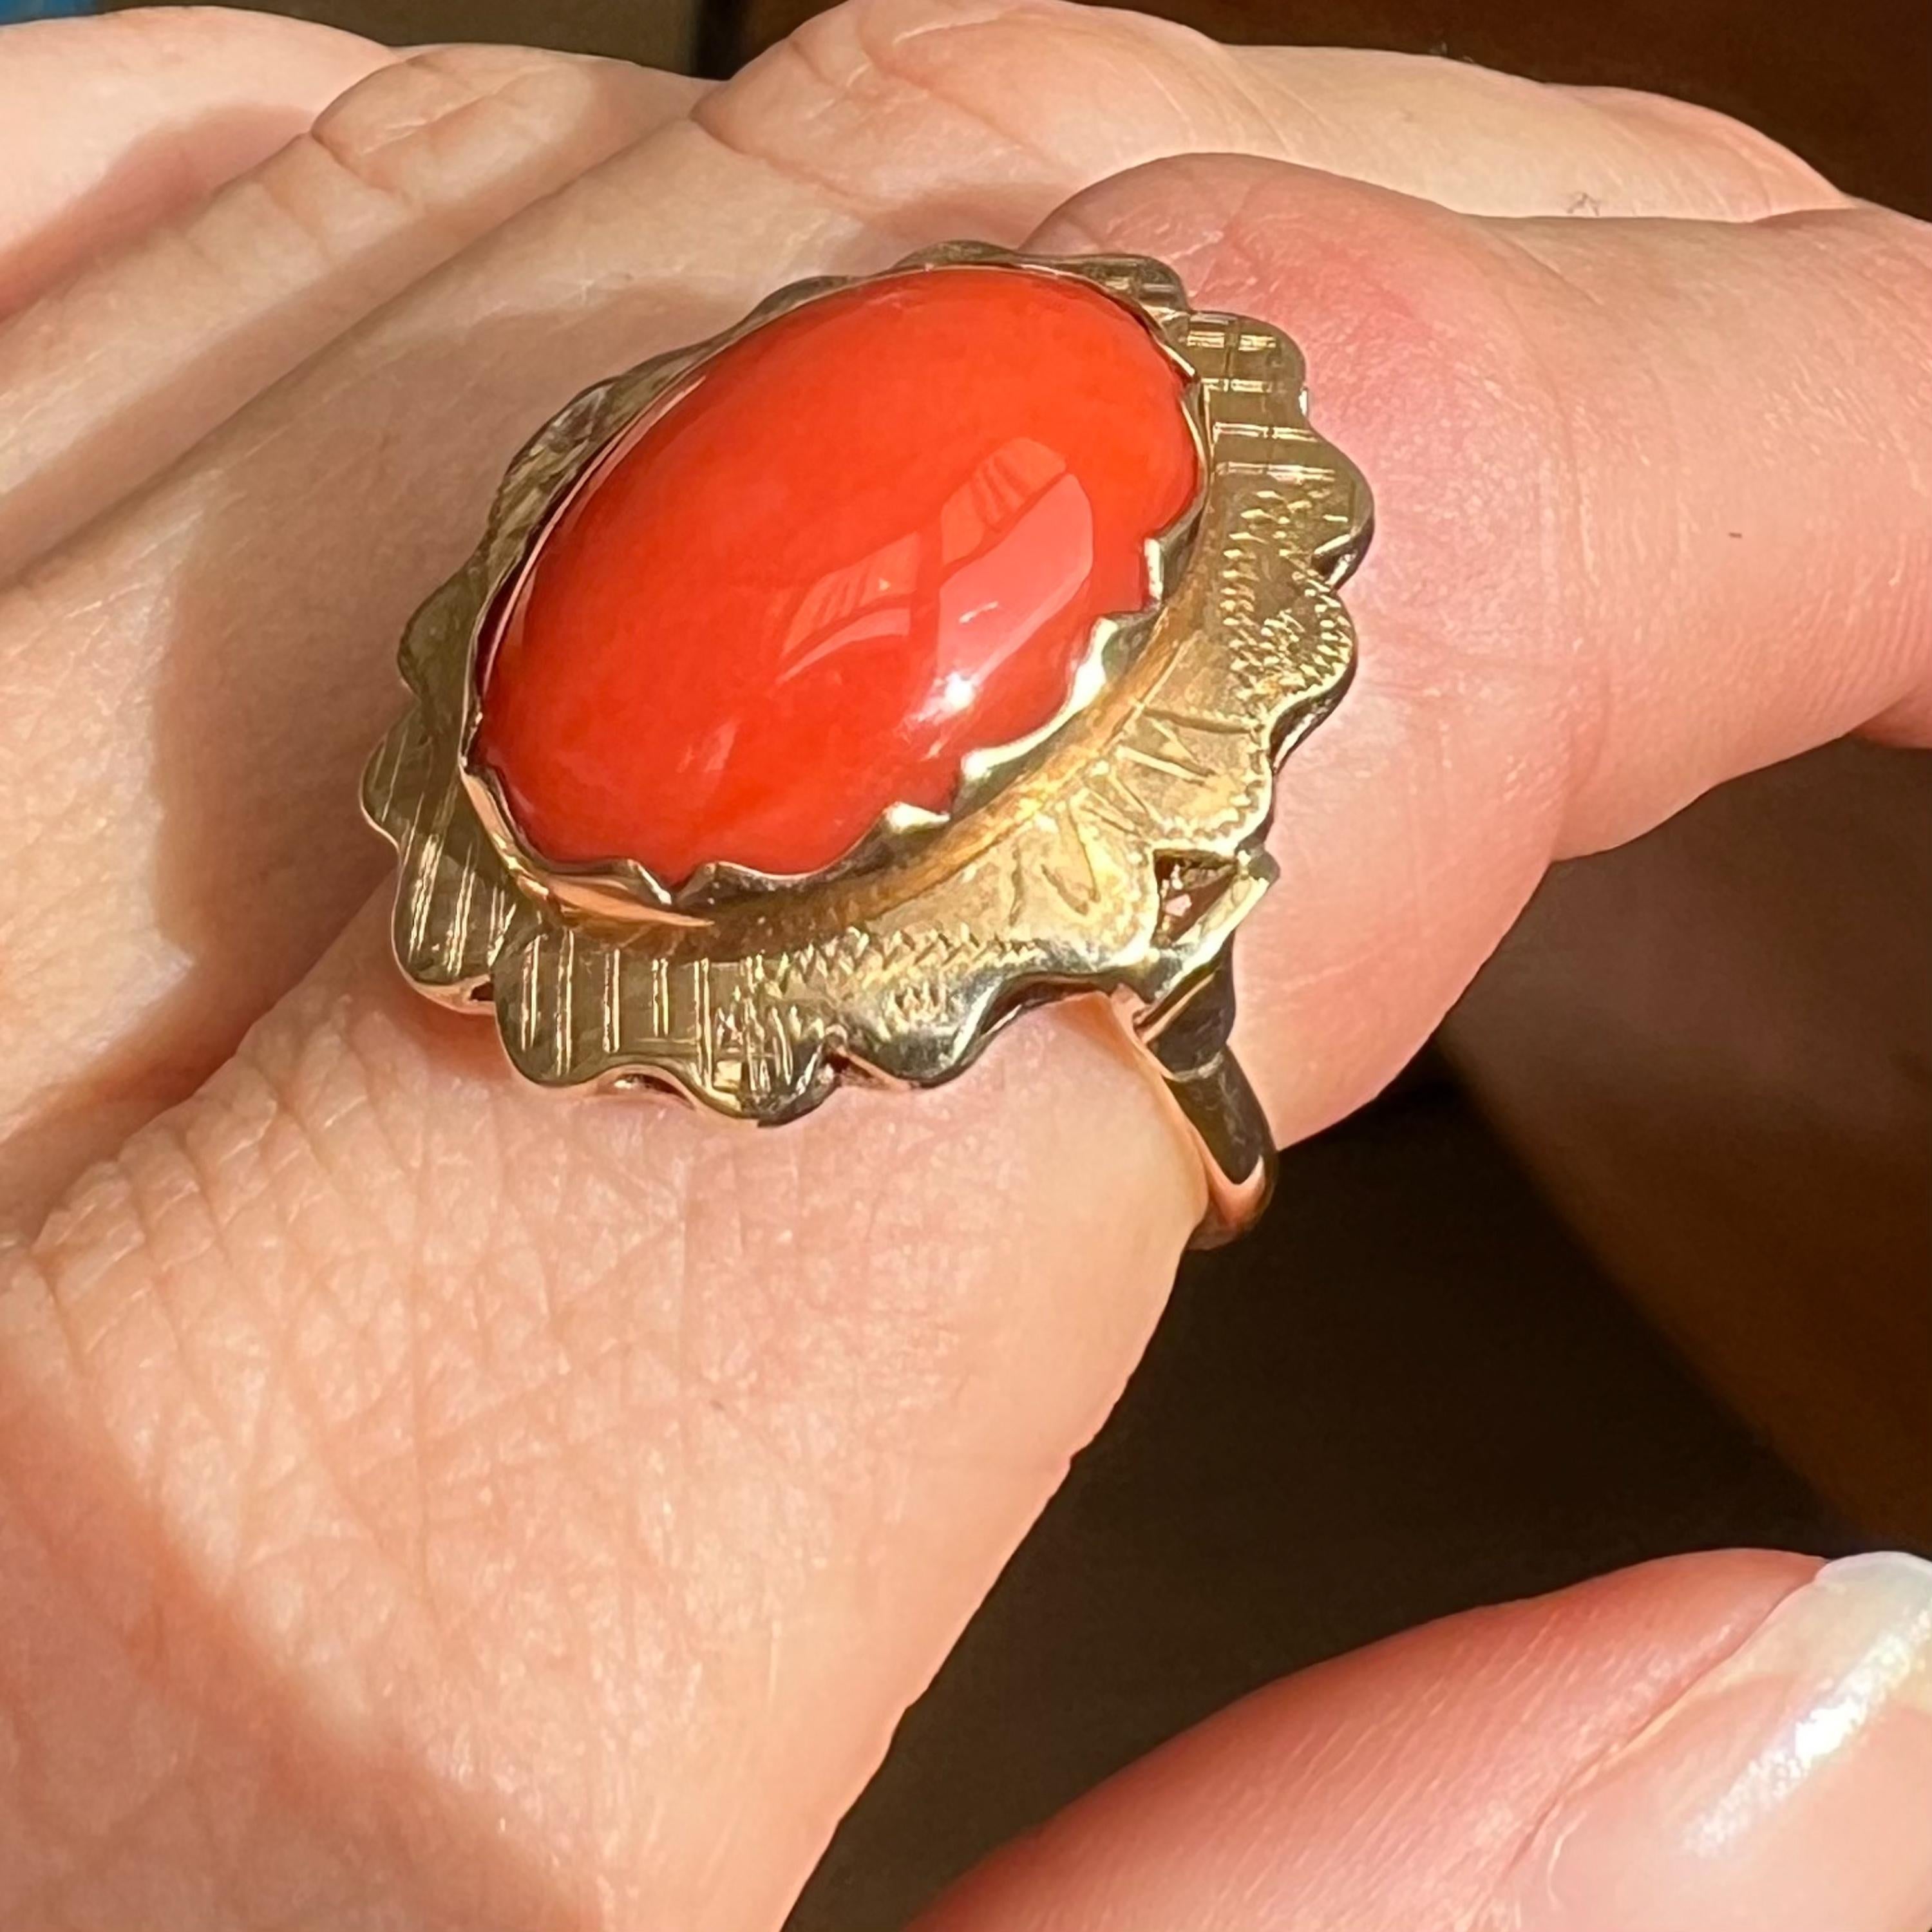 A natural red coral ring set in a 14 karat gold oval-shaped mounting. The coral is bezel set in this 14 karat gold worked and engraved mounting. The prongs have a scalloped design and fit beautifully around the oval-shaped stone. The ring is